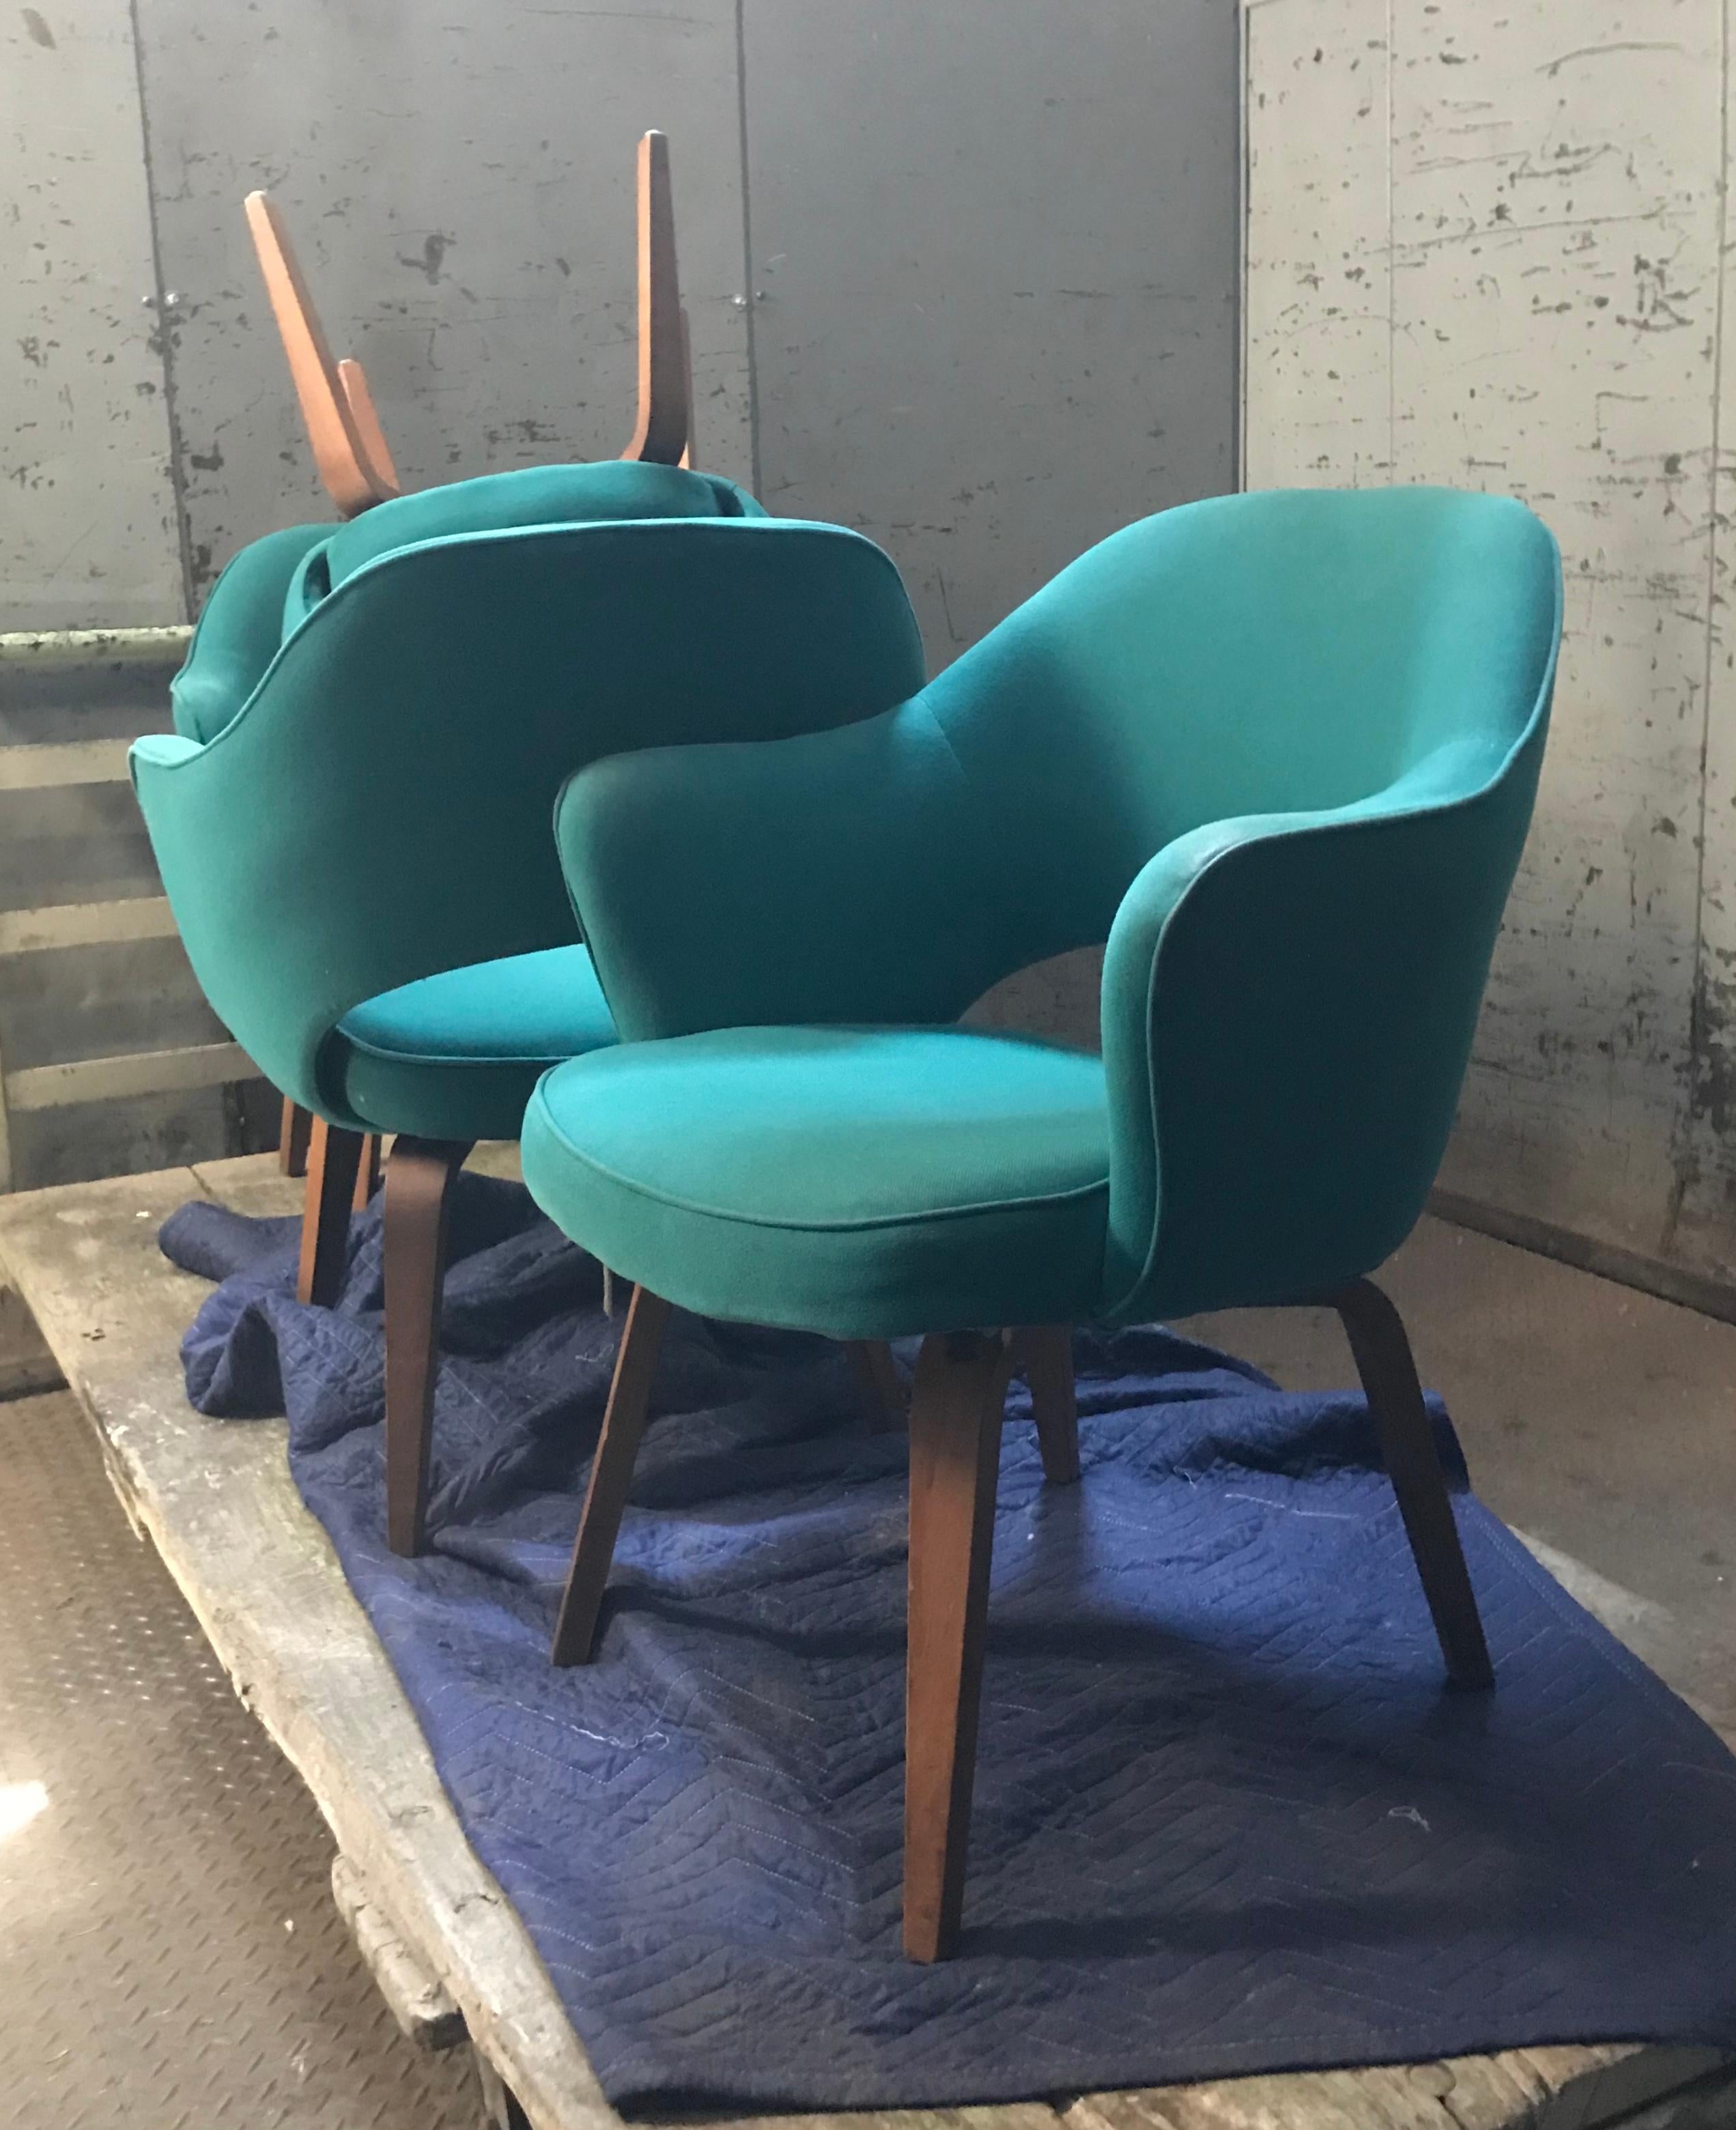 Matched set of four early Knoll Saarinen executive armchairs with bentwood legs, pair of Knoll Saarinen Executive armchairs 

1950s design. 
Molded reinforced polyurethane shell 
Contoured plywood seat form. 
Bentwood legs 
Retains original